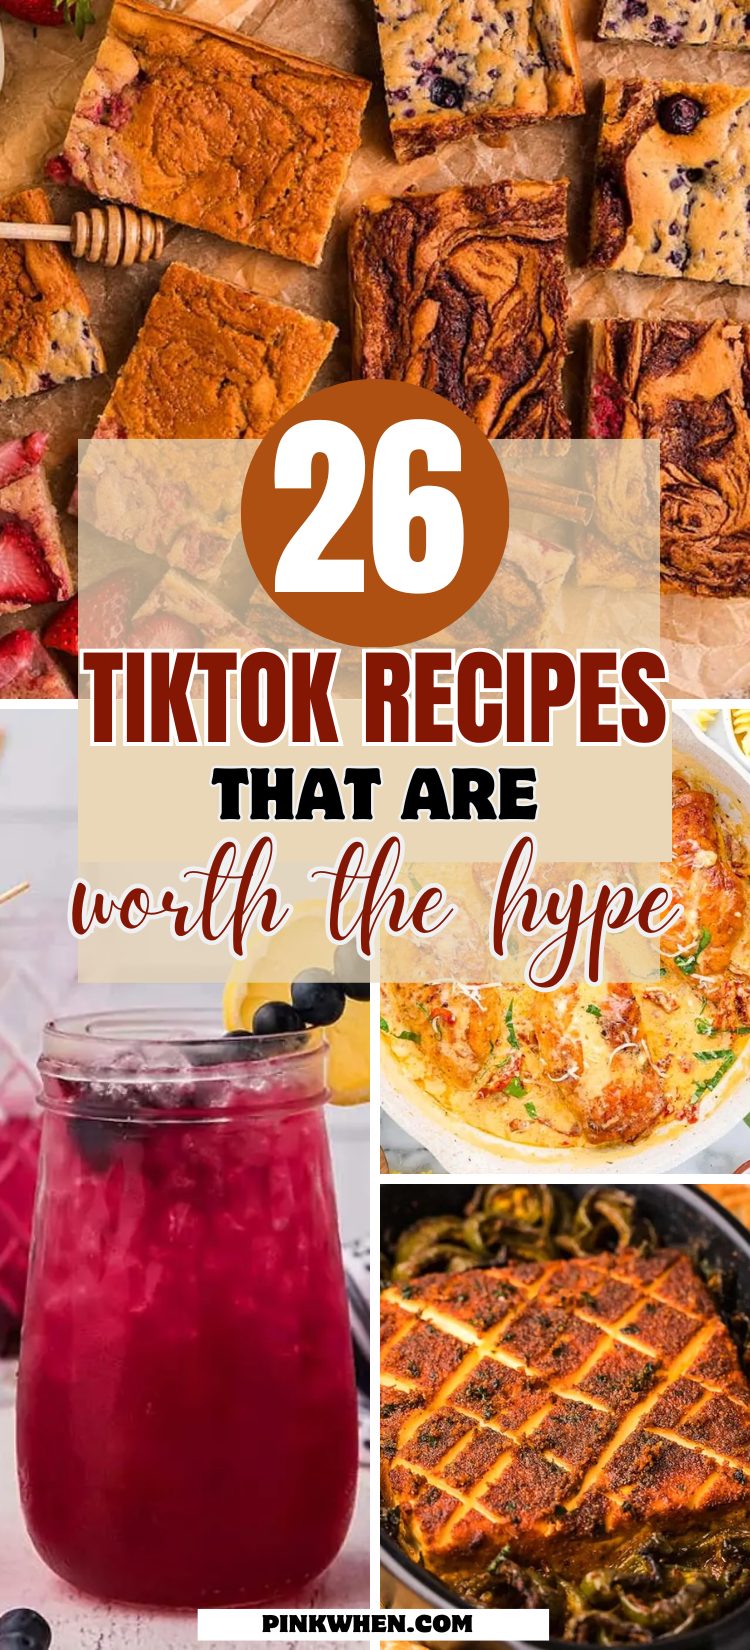 29 TikTok Recipes That Are Worth The Hype